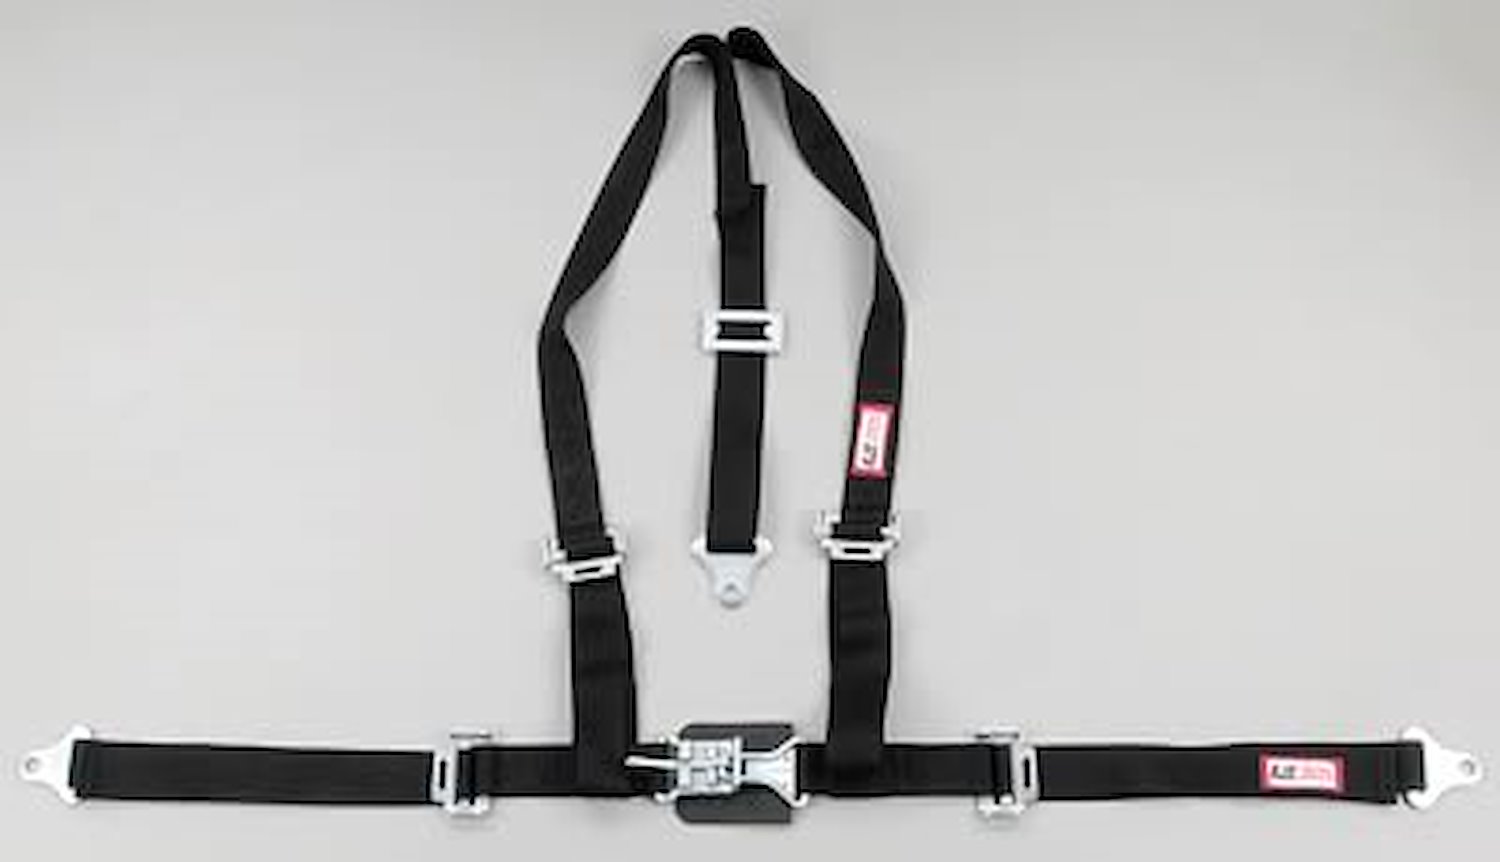 NON-SFI L&L HARNESS 2 PULL UP Lap Belt SNAP SEWN IN 2 S.H. INDIVIDUAL FLOOR Mount WRAP/BOLT BLACK